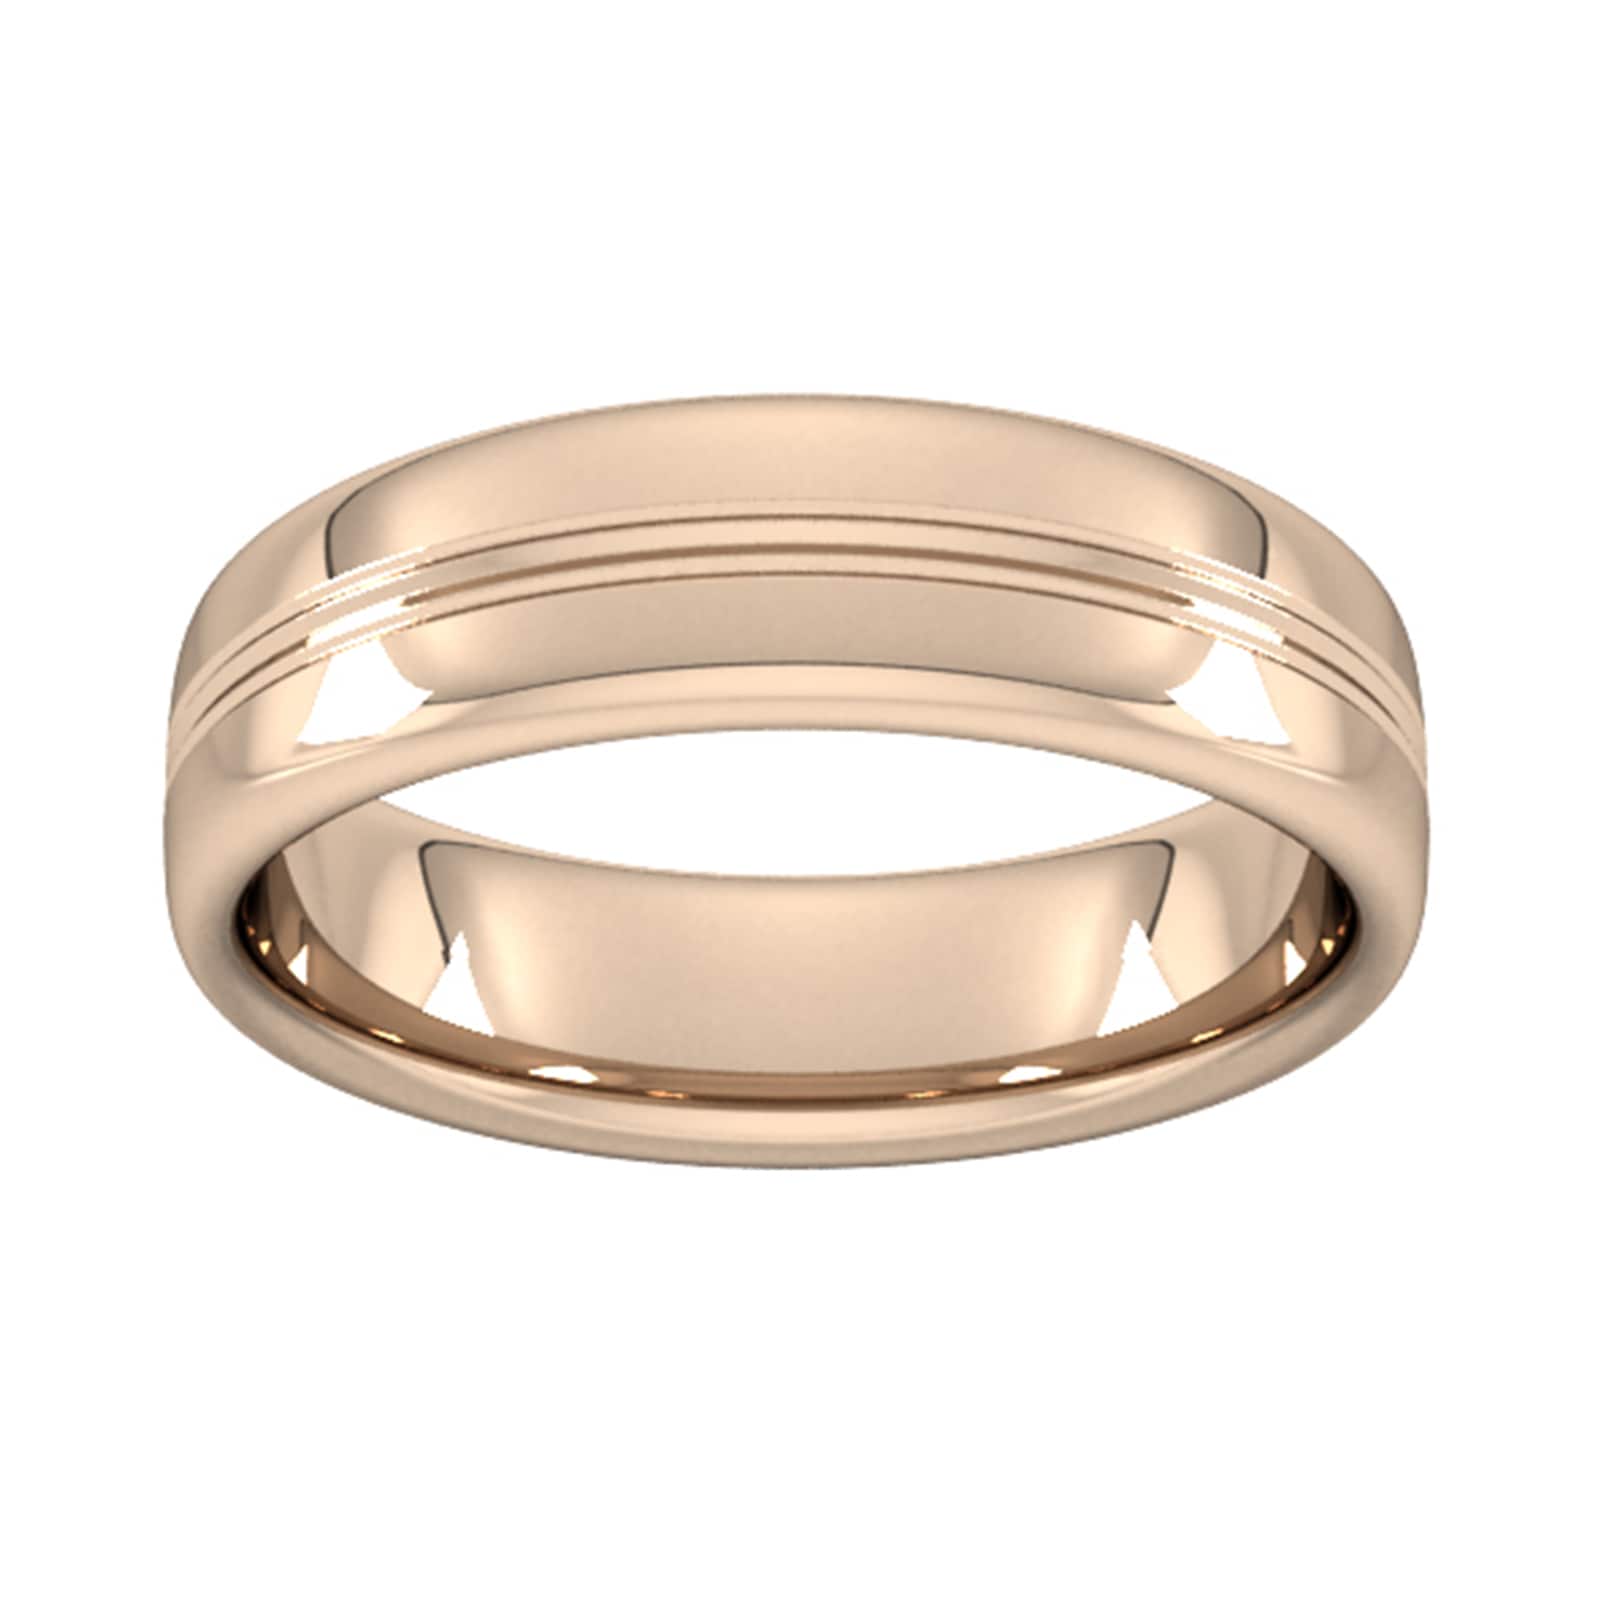 6mm Slight Court Extra Heavy Grooved Polished Finish Wedding Ring In 18 Carat Rose Gold - Ring Size K